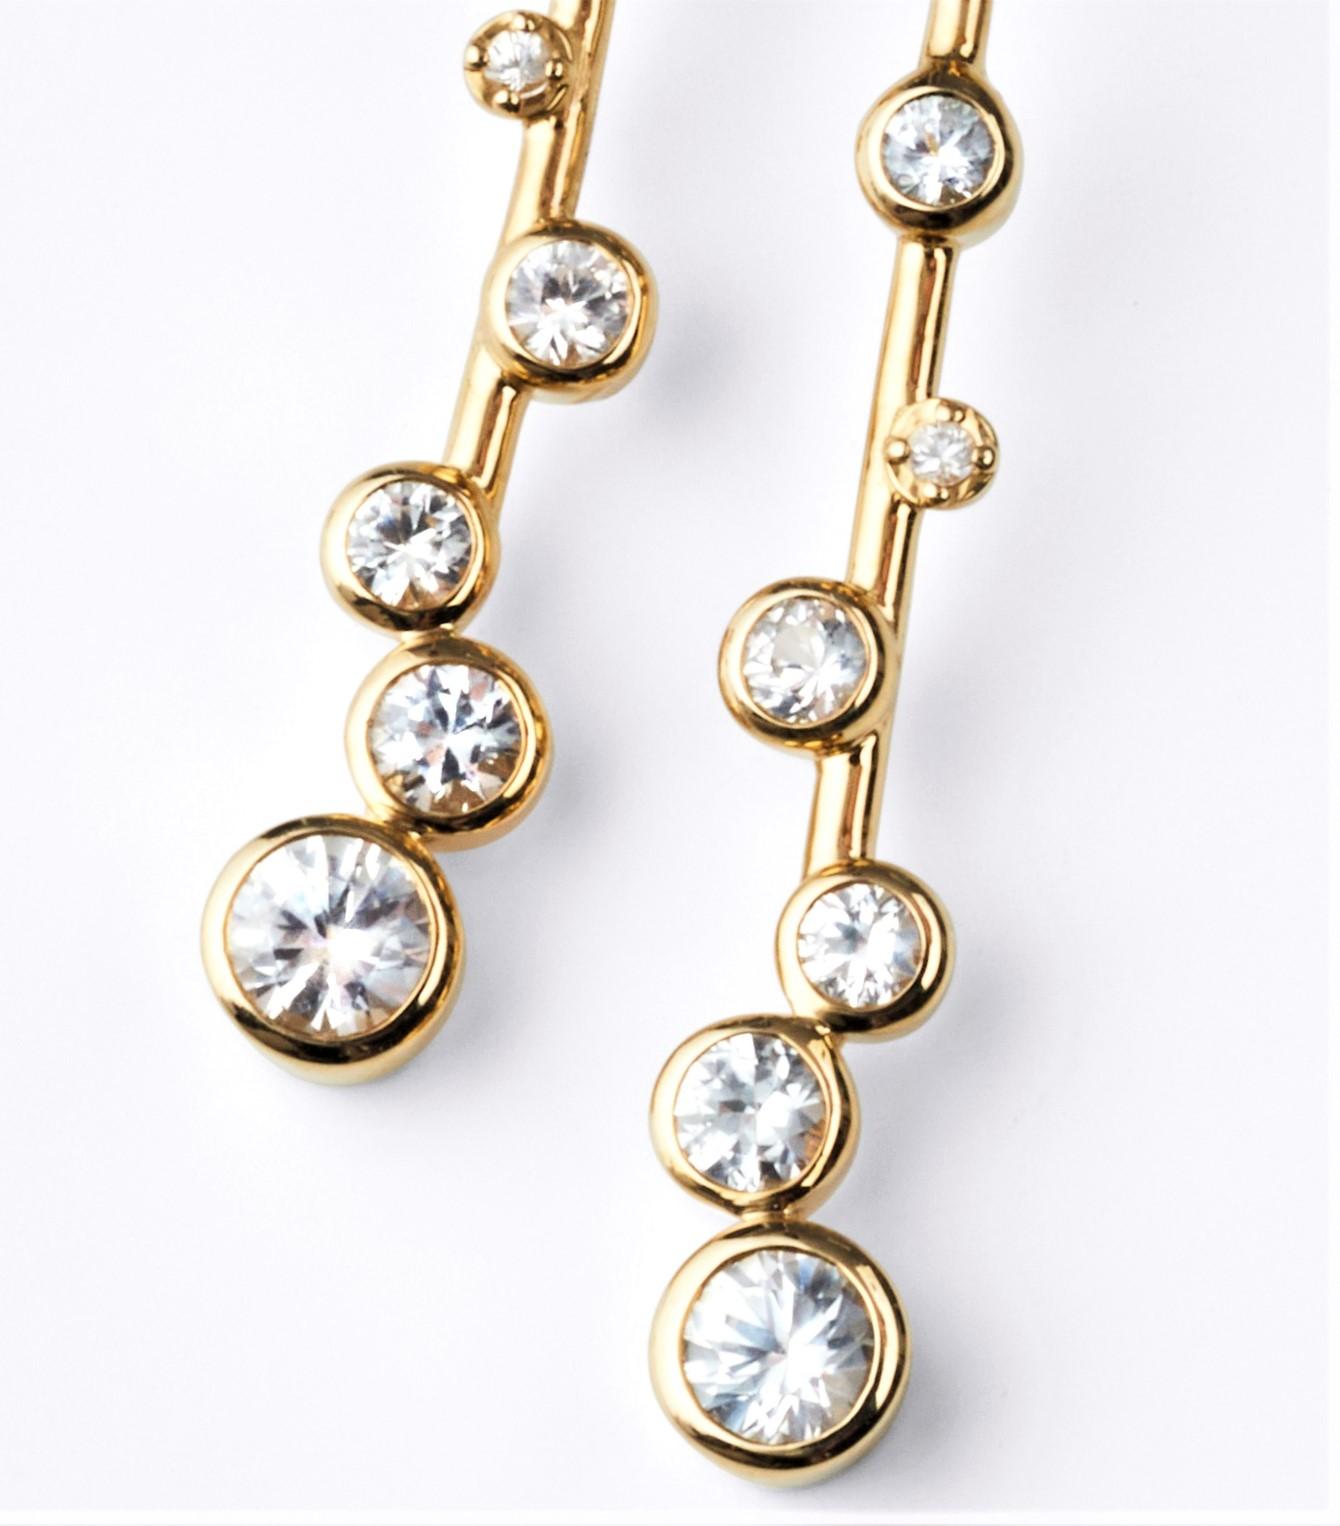 Hip, sophisticated, fun celebration of the stars.... don't keep these earrings in your lock box - these are meant to be worn!!!   
These Elongated Constellation earrings are 14k  with 1.1 carats of sparkling white sapphires; and 0.08 carats of